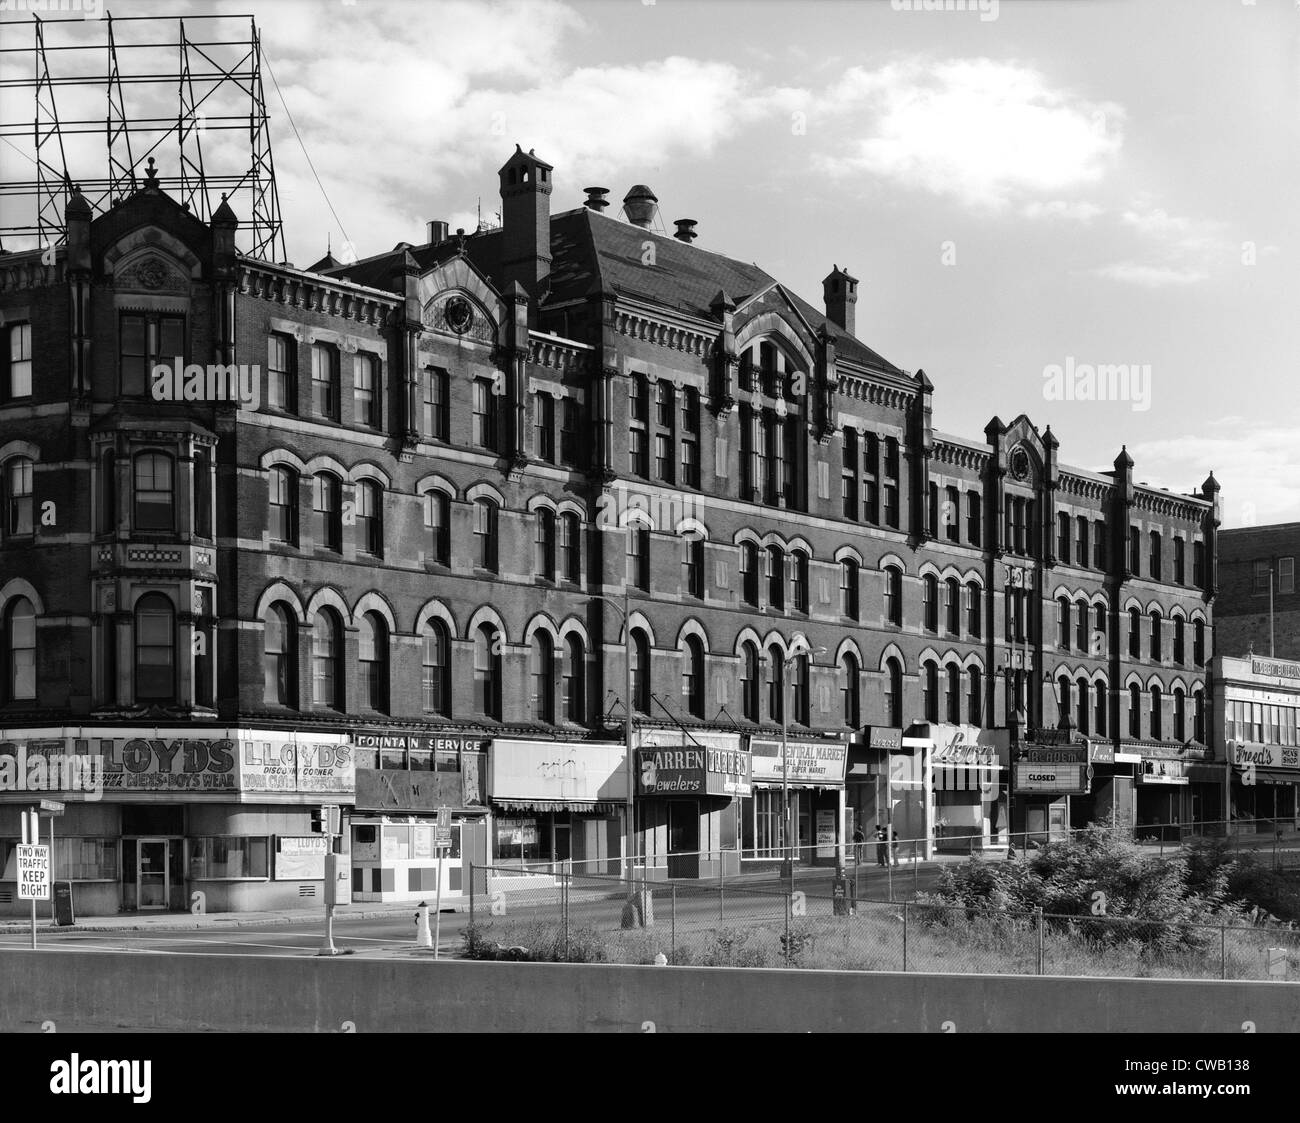 Movie Theaters, Academy Building, Academy theater is to the right, constructed in 1876, 68-114 South Main Street, Fall River, Stock Photo